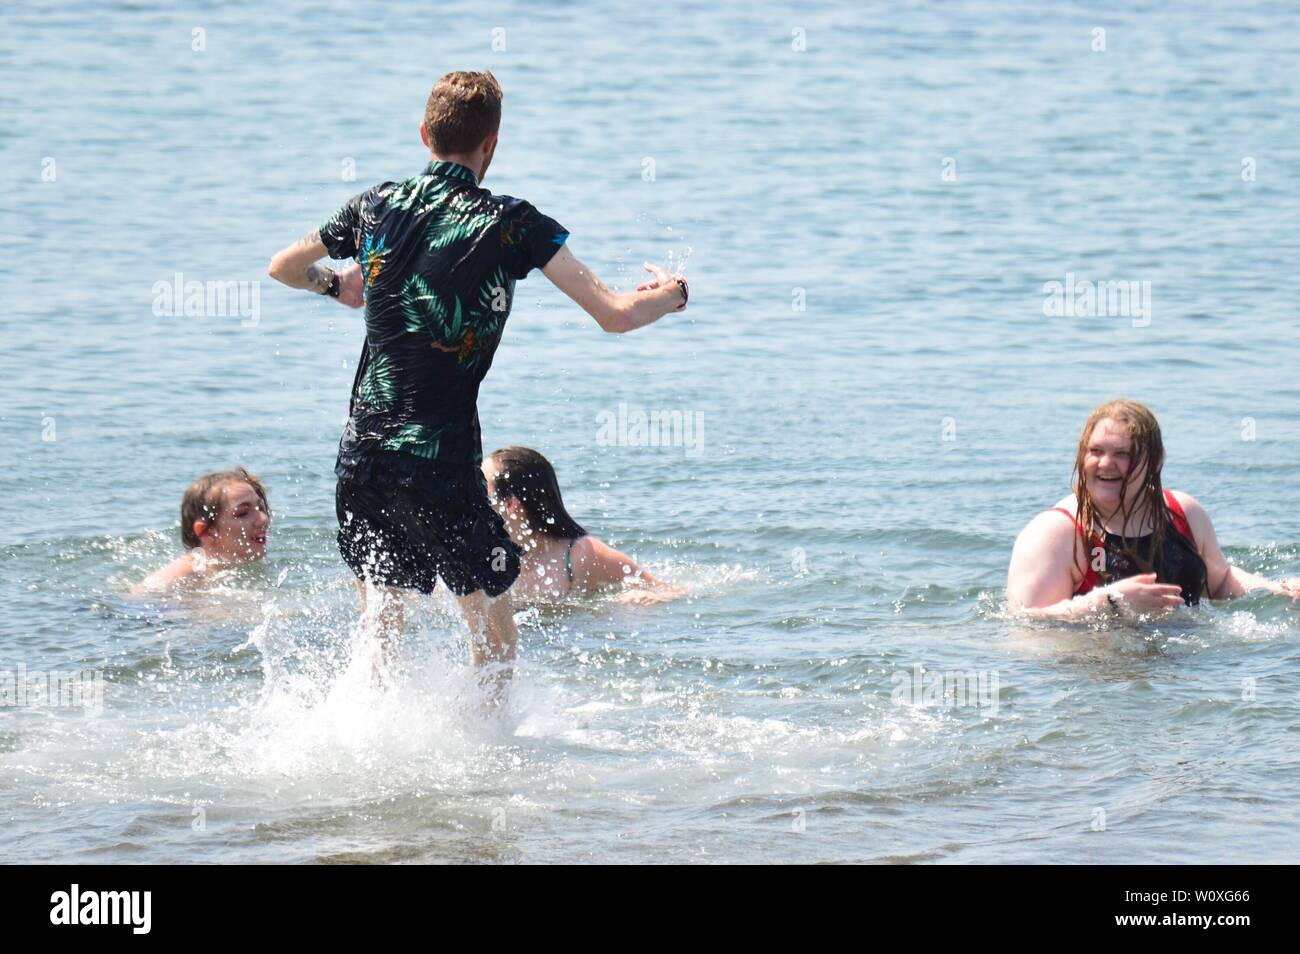 Aberystwyth, Wales, UK. 28th Jun 2019. UK weather: People at the seaside in Aberystwyth enjoying a day of unbroken blue skies and hot sunshine. The country is heading towards the hottest day of the year so far as a plume of scorching hot air drifts in from the continent. Photo Credit: keith morris/Alamy Live News Stock Photo